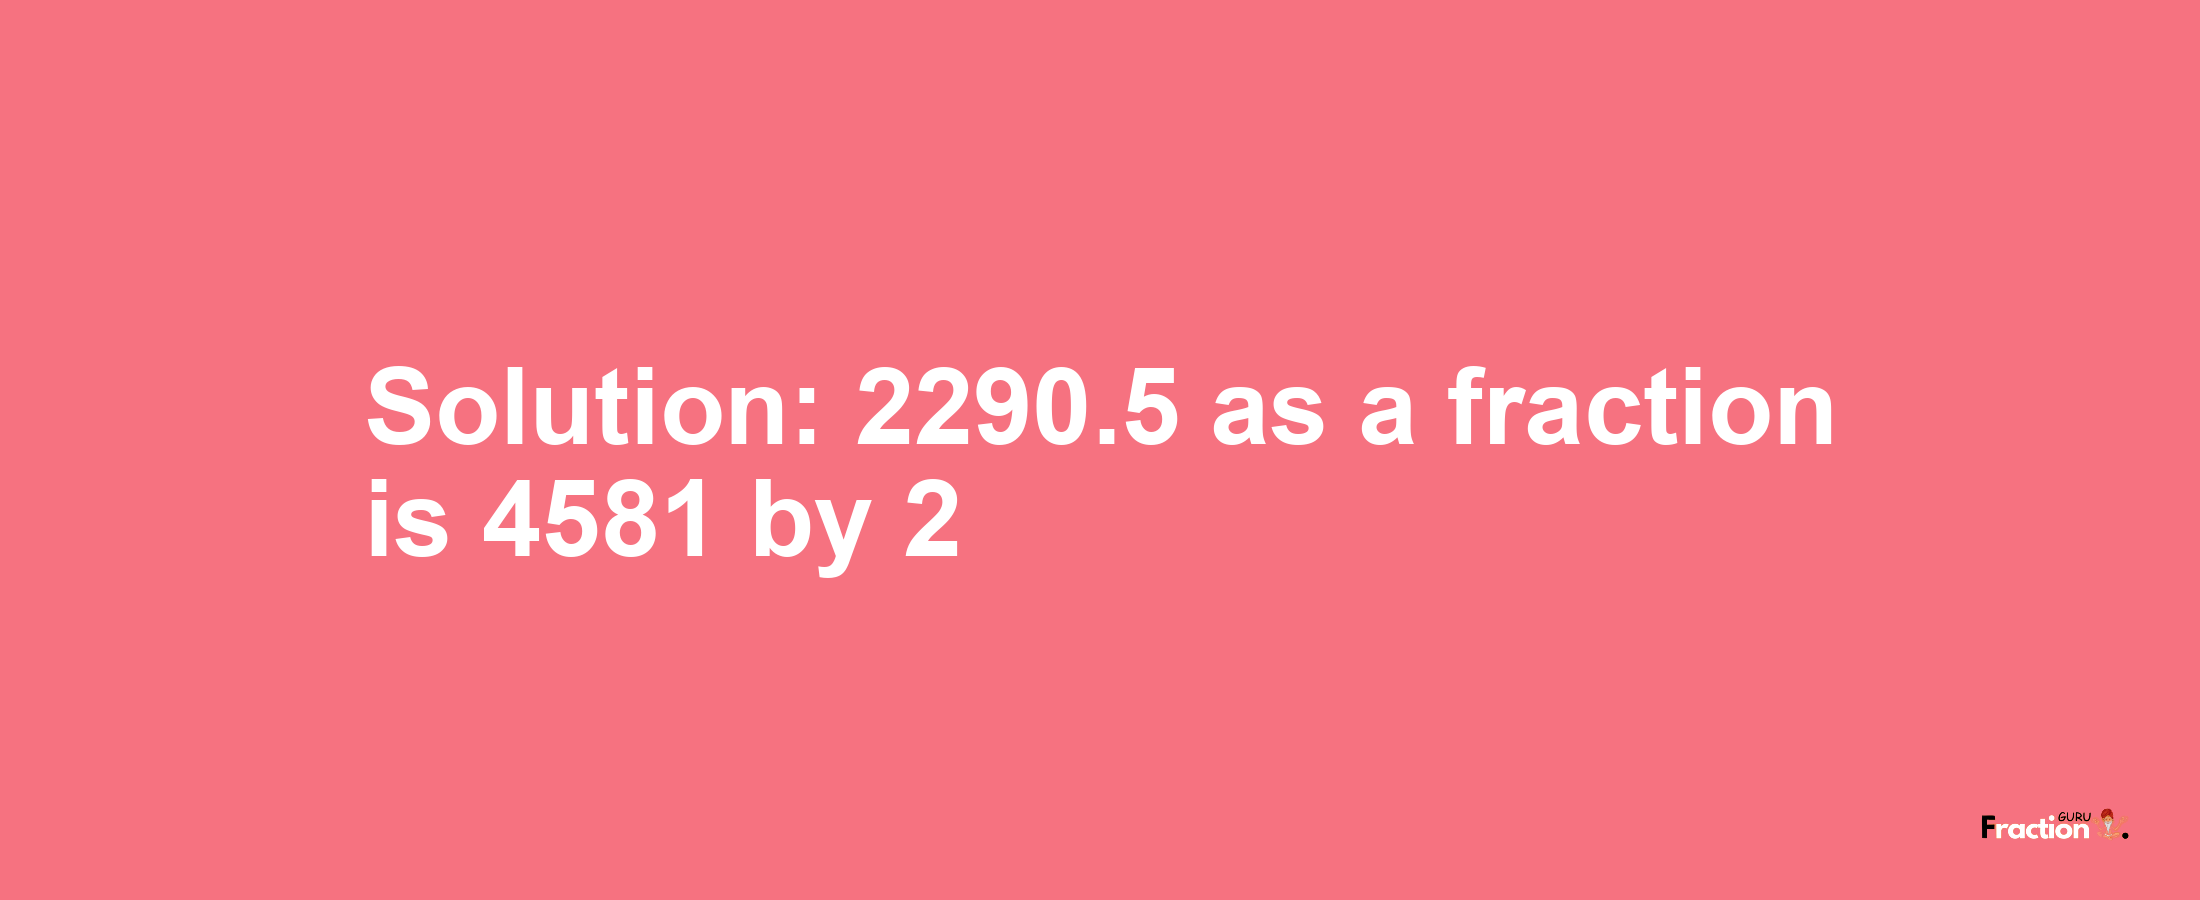 Solution:2290.5 as a fraction is 4581/2